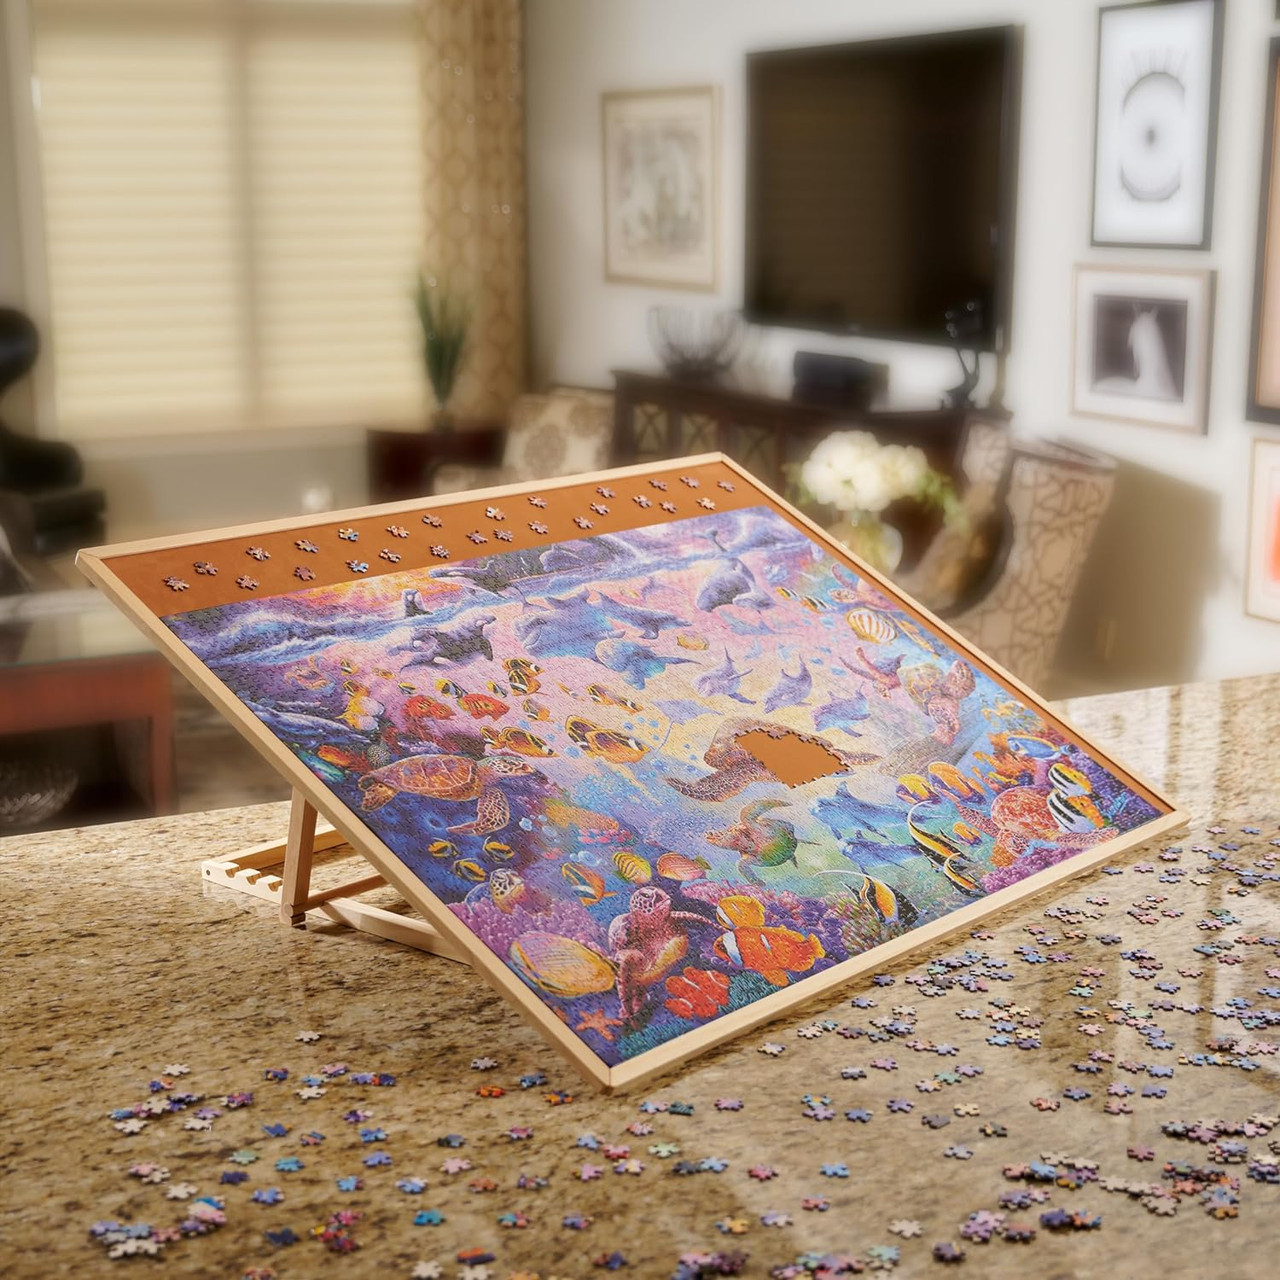 Pre-Assembled Wooden Easel Puzzle Board - Accommodates Puzzles up